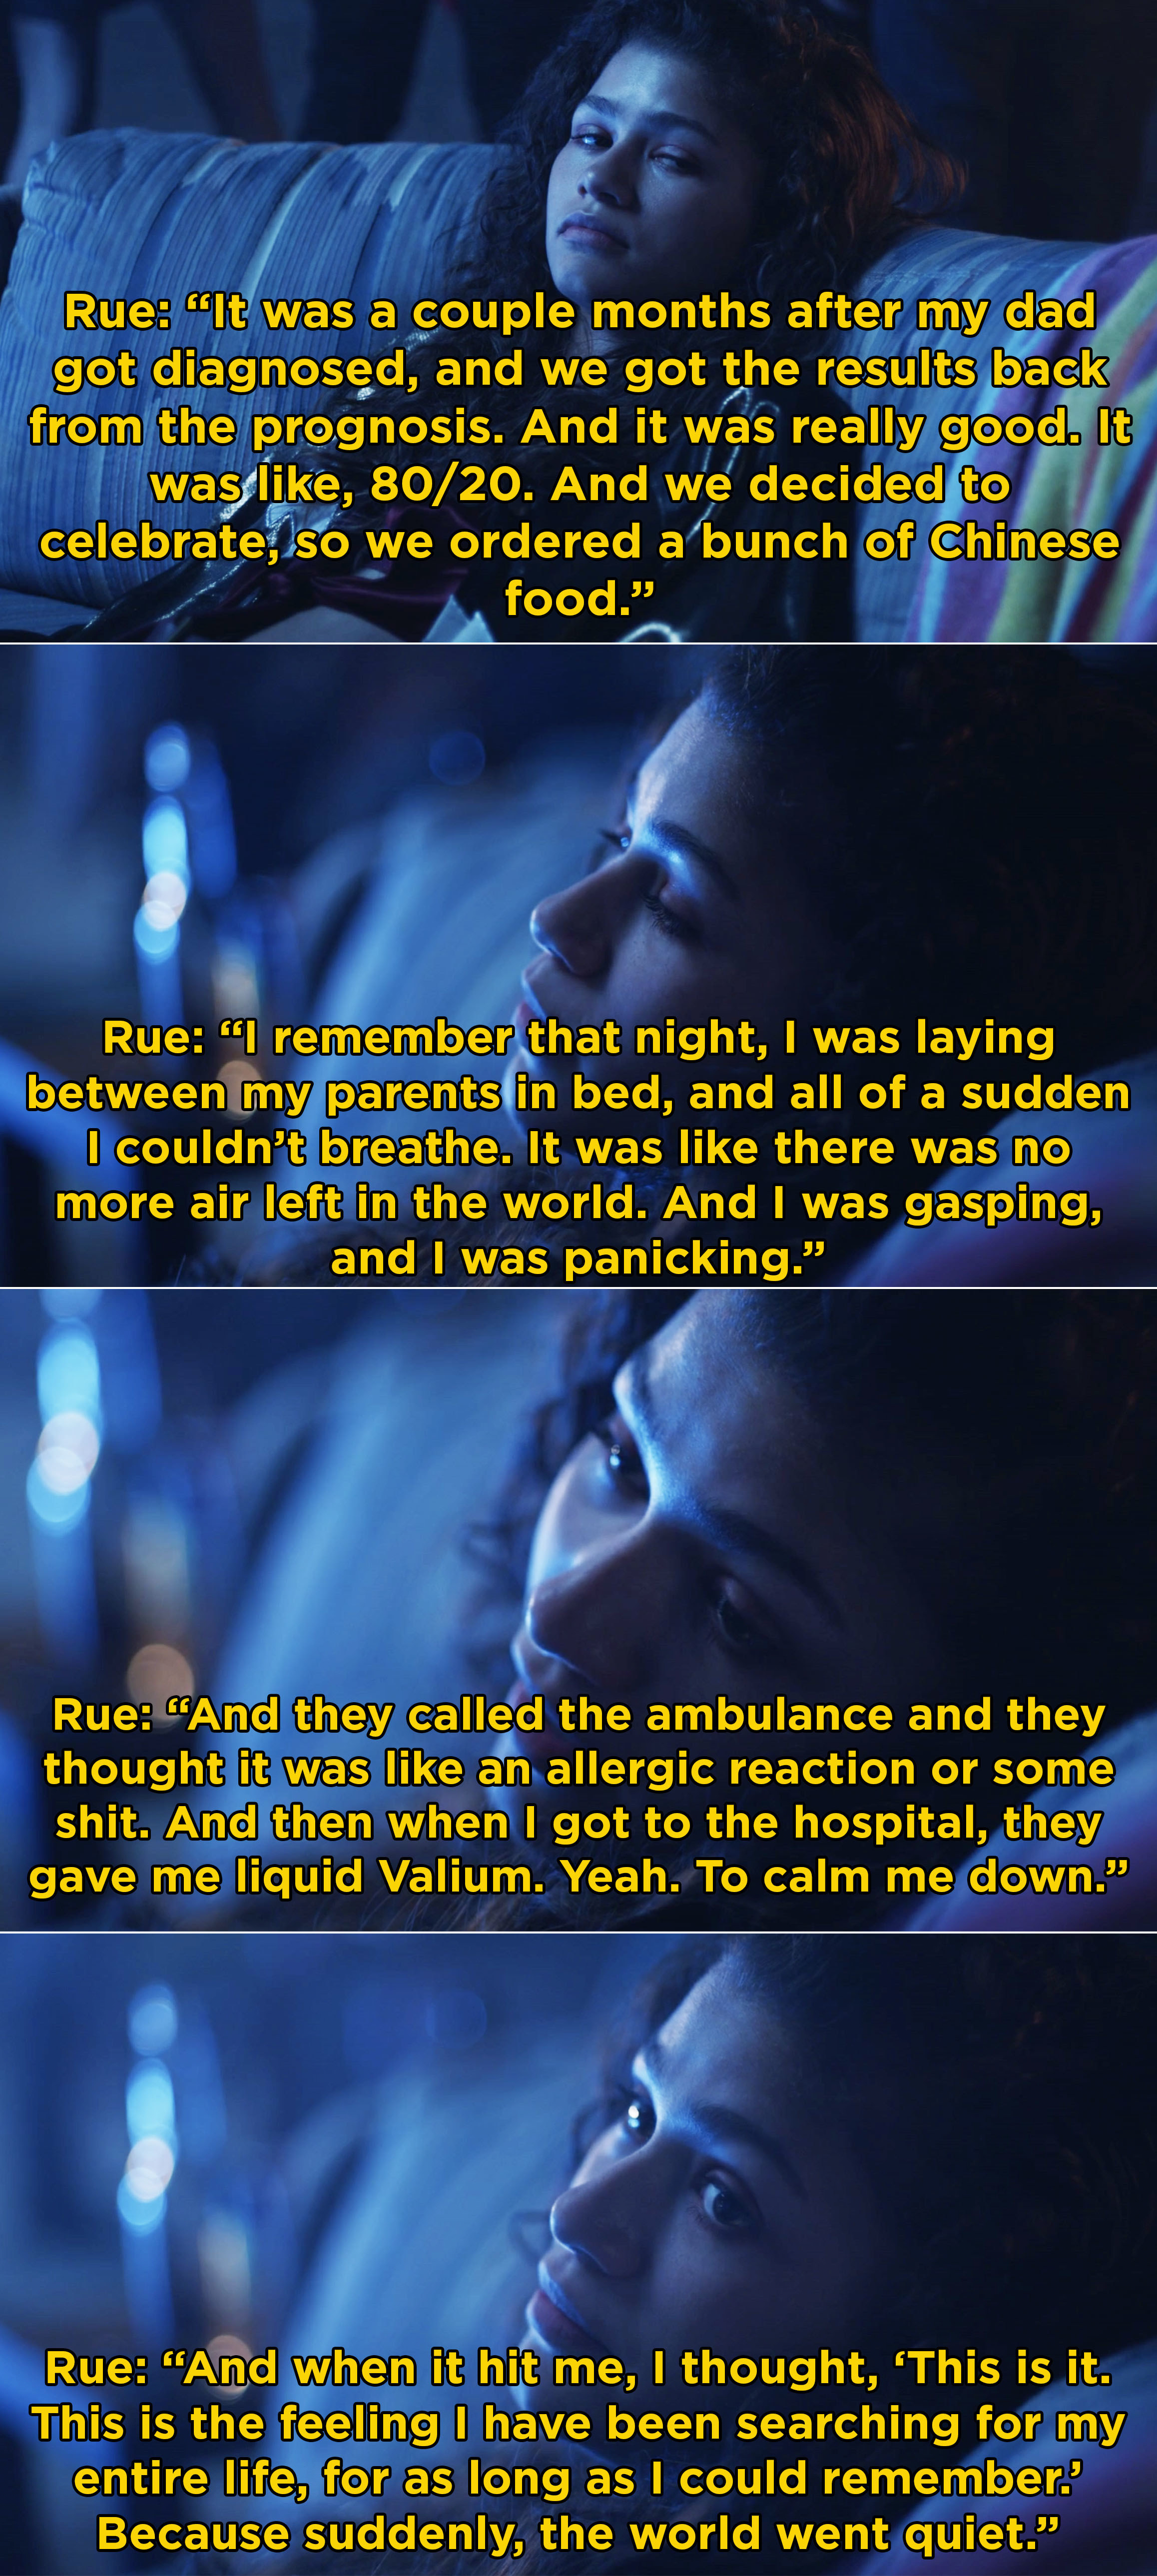 Rue explaining how she had his first panic attack lying in bed with her parents and after she had valium for the first time, &quot;the world went quiet&quot;